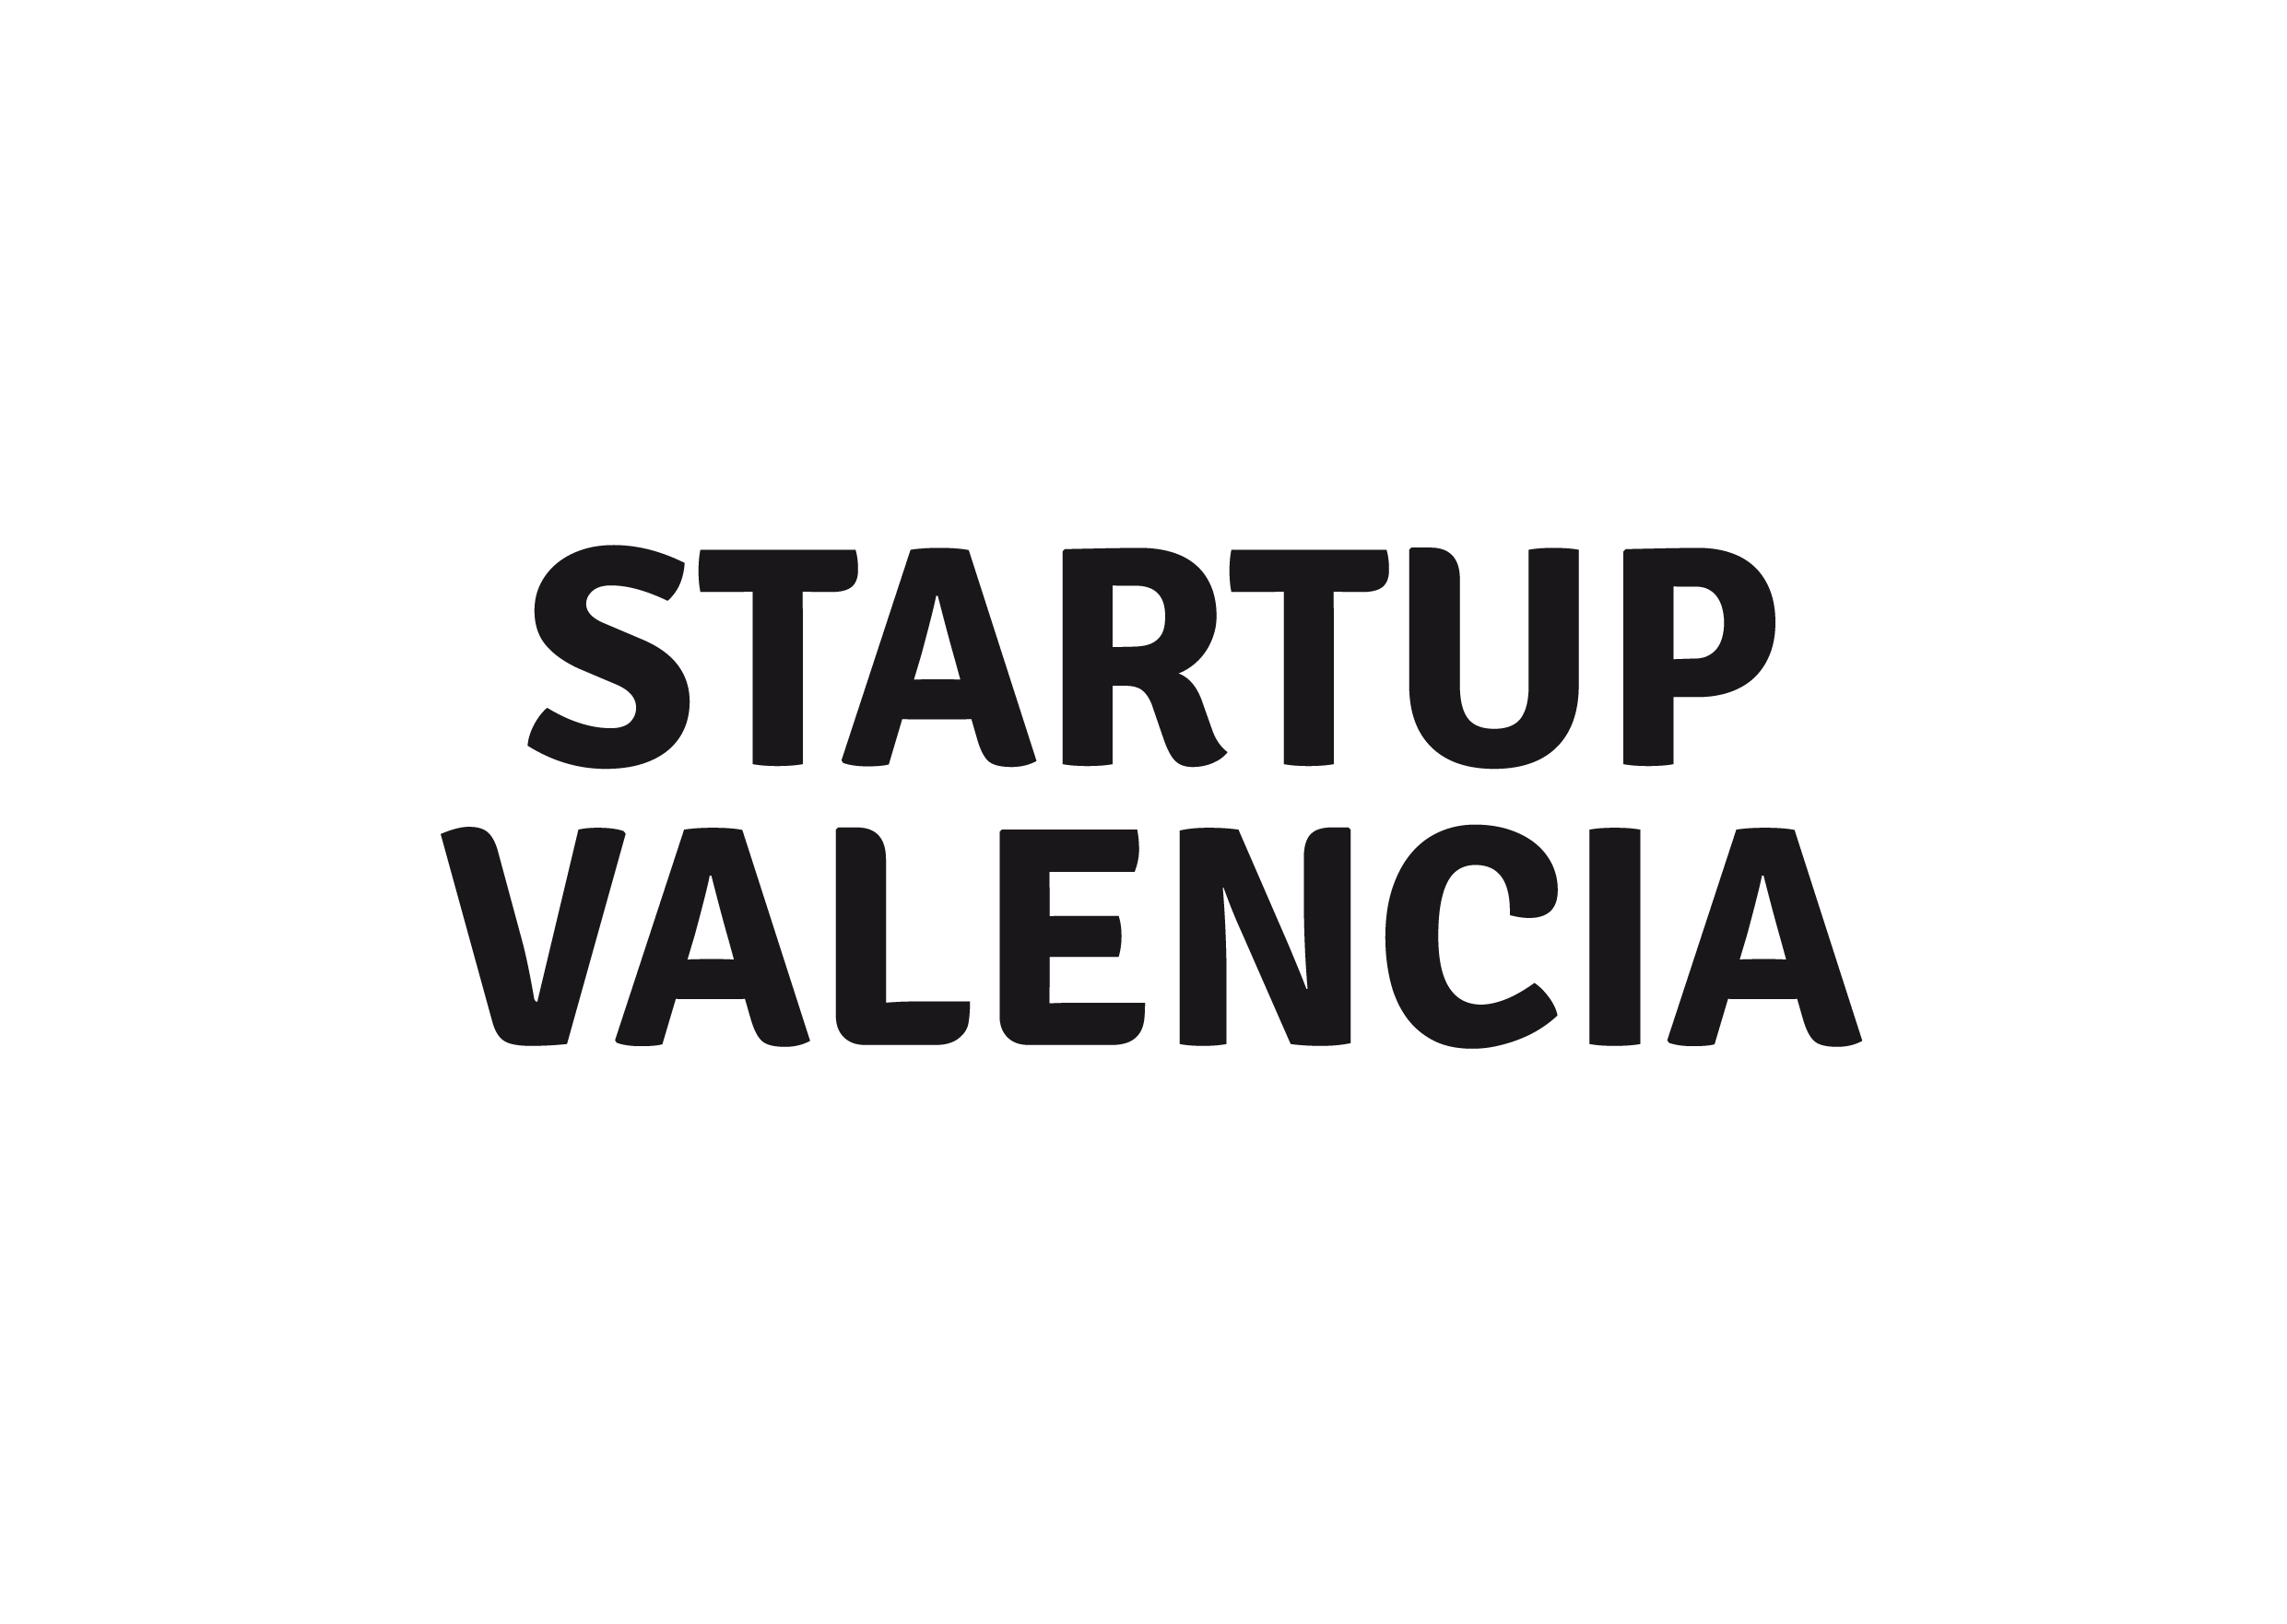 Startup Valencia negro (PNG)